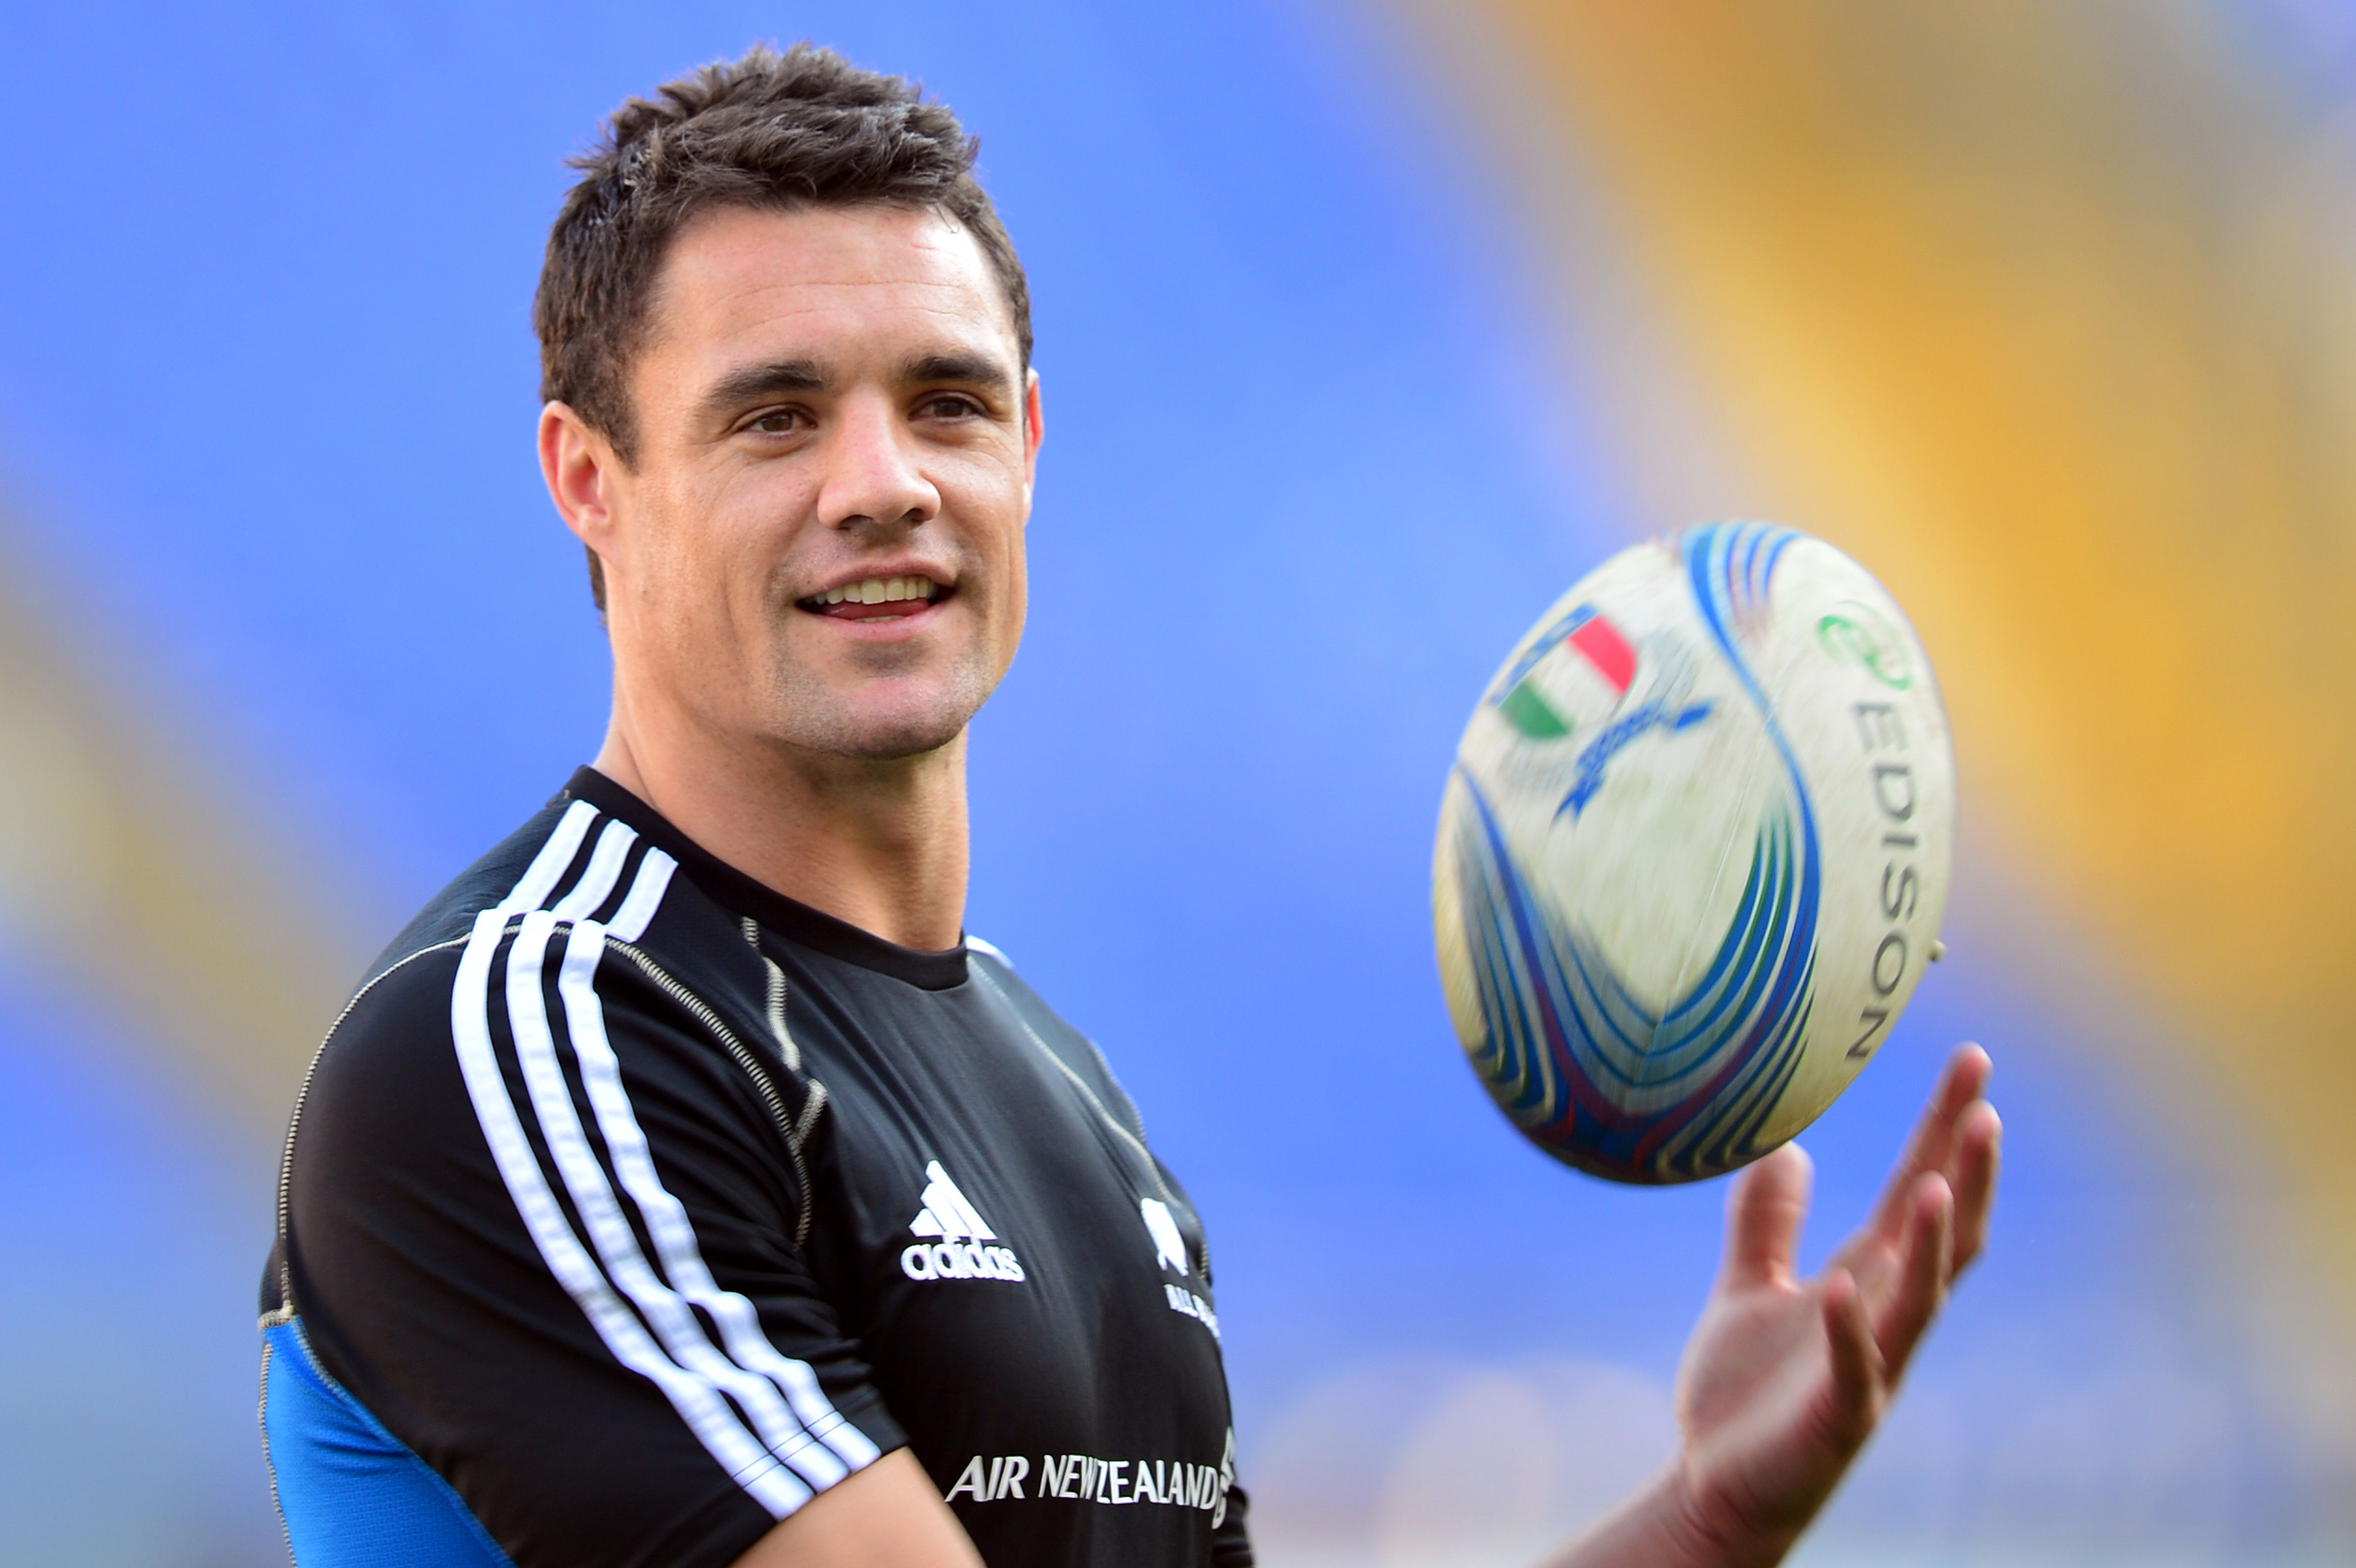 Fly-half Dan Carter will be on the bench for the Crusaders against the Hurricanes – his first Super 15 game since taking a six-month break at the end of last year. Photo: AFP